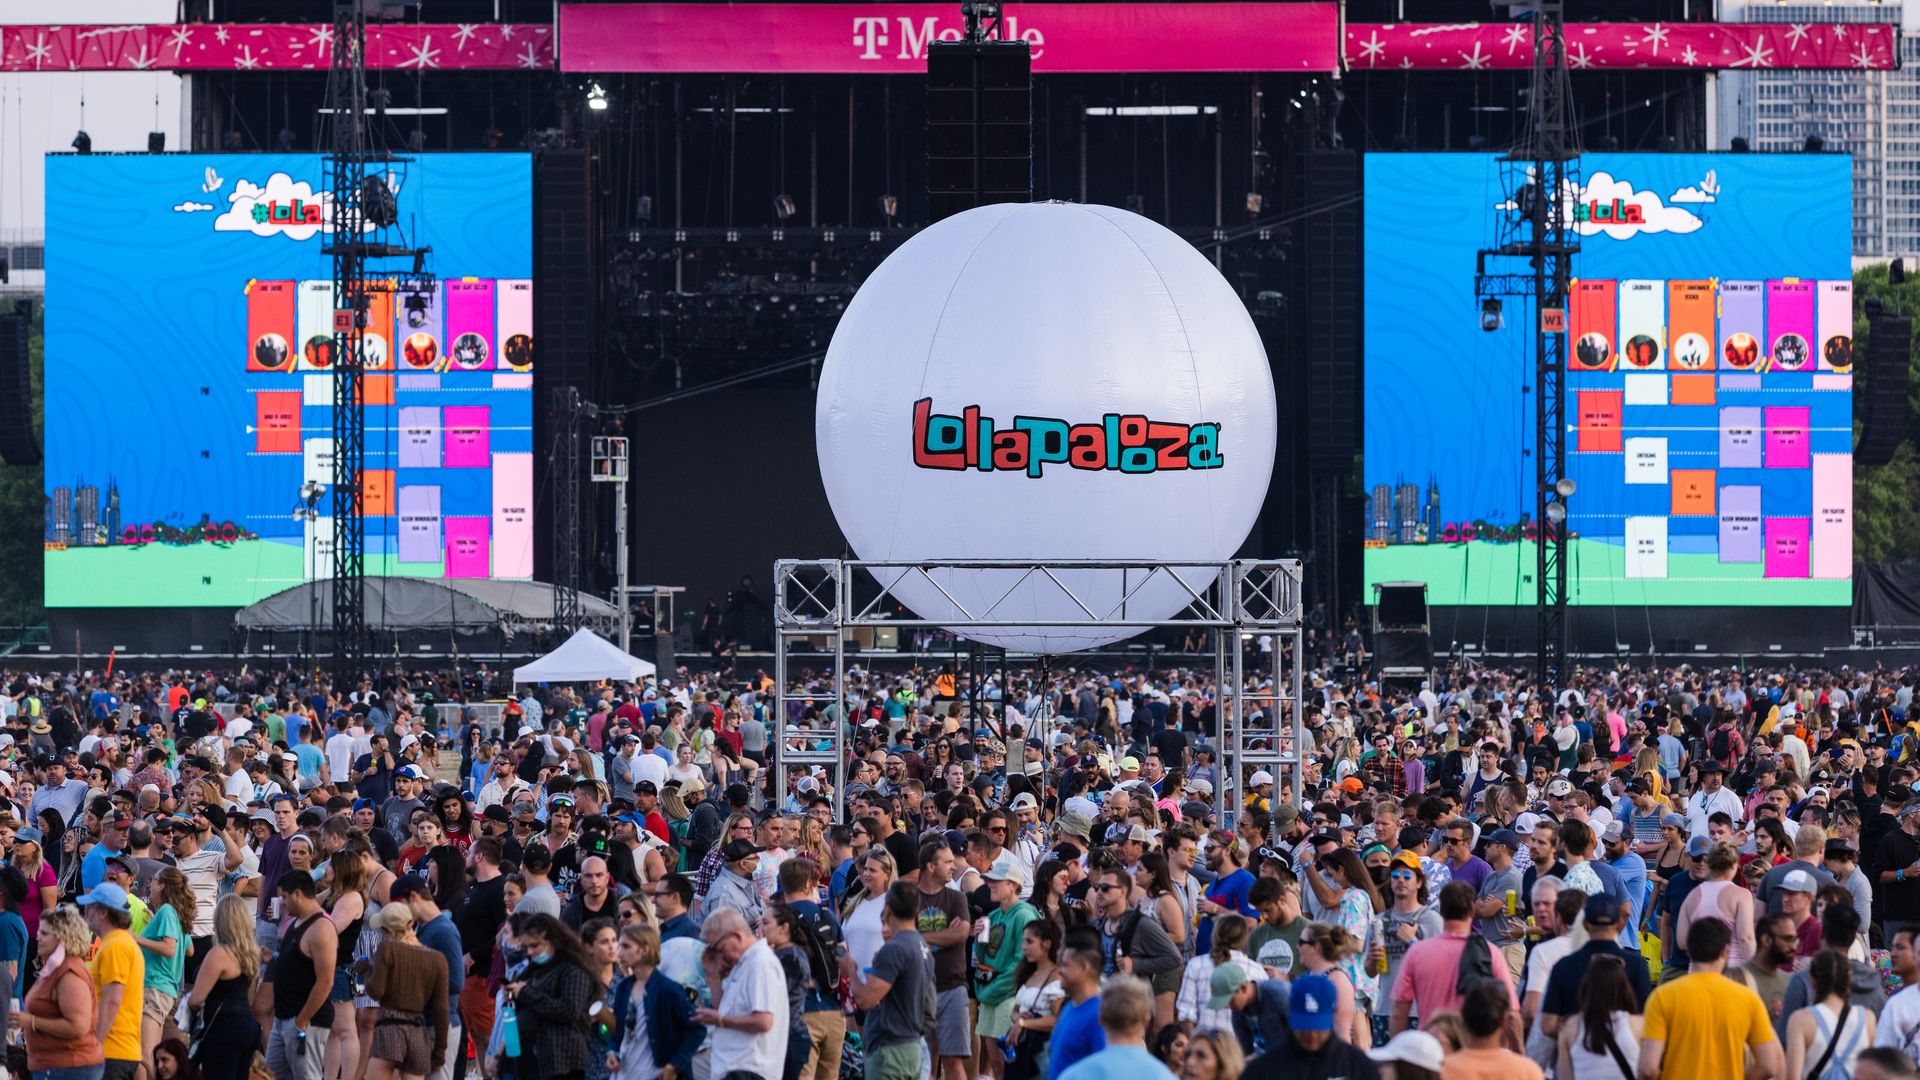 Lollapalooze 2021. Photo by Michael Hickey/Getty Images